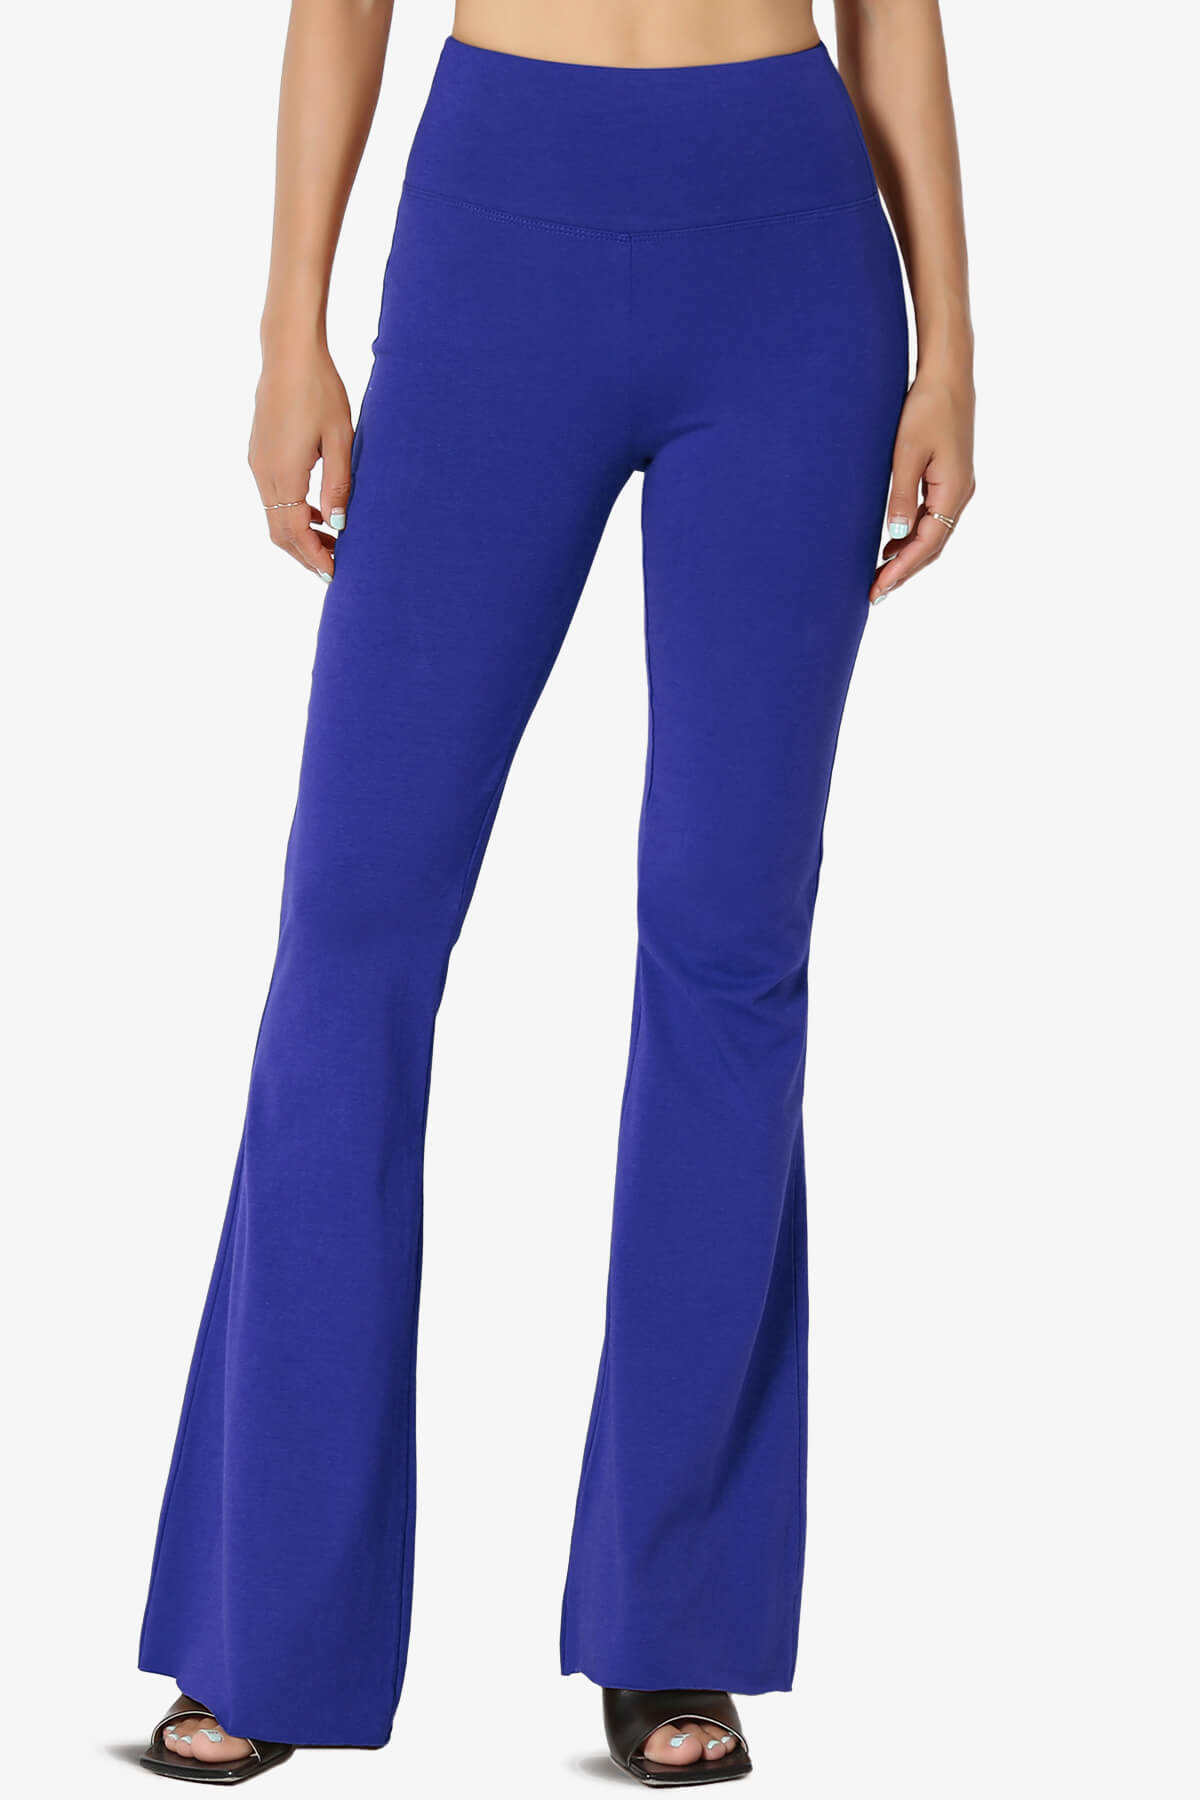 Load image into Gallery viewer, Zaylee Raw Hem Flared Comfy Yoga Pants BRIGHT BLUE_1
